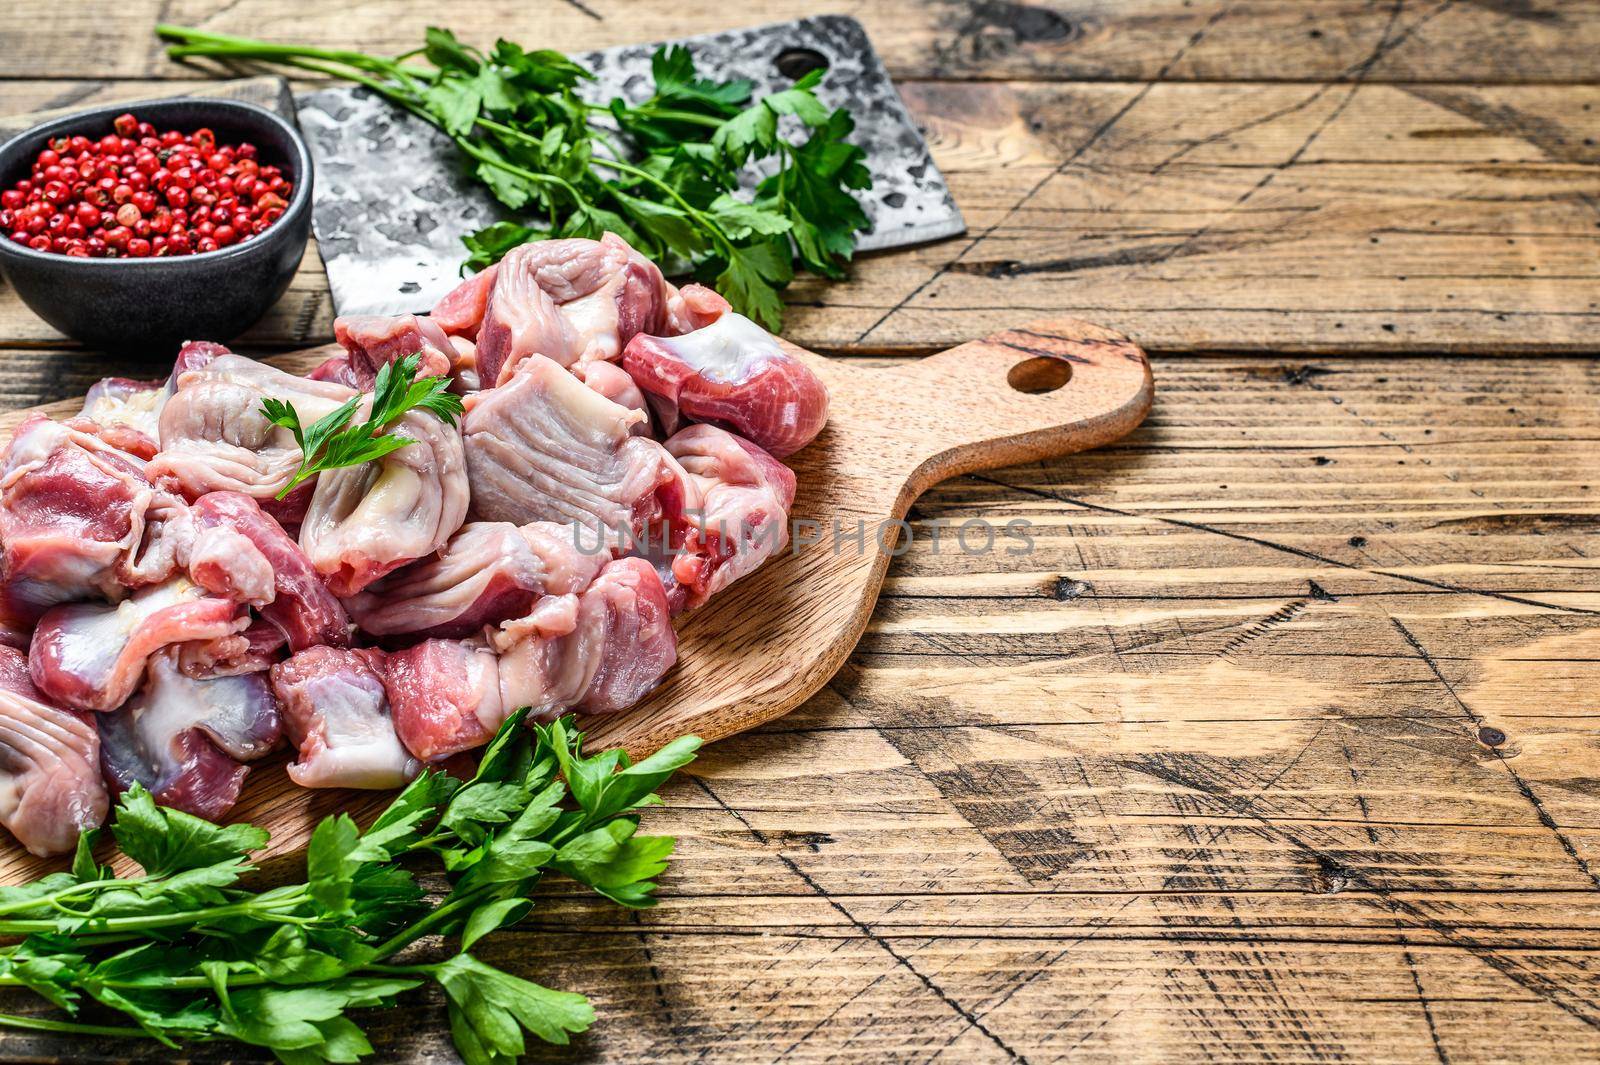 Raw uncooked chicken gizzards, stomach on a cutting board. wooden background. Top view. Copy space by Composter